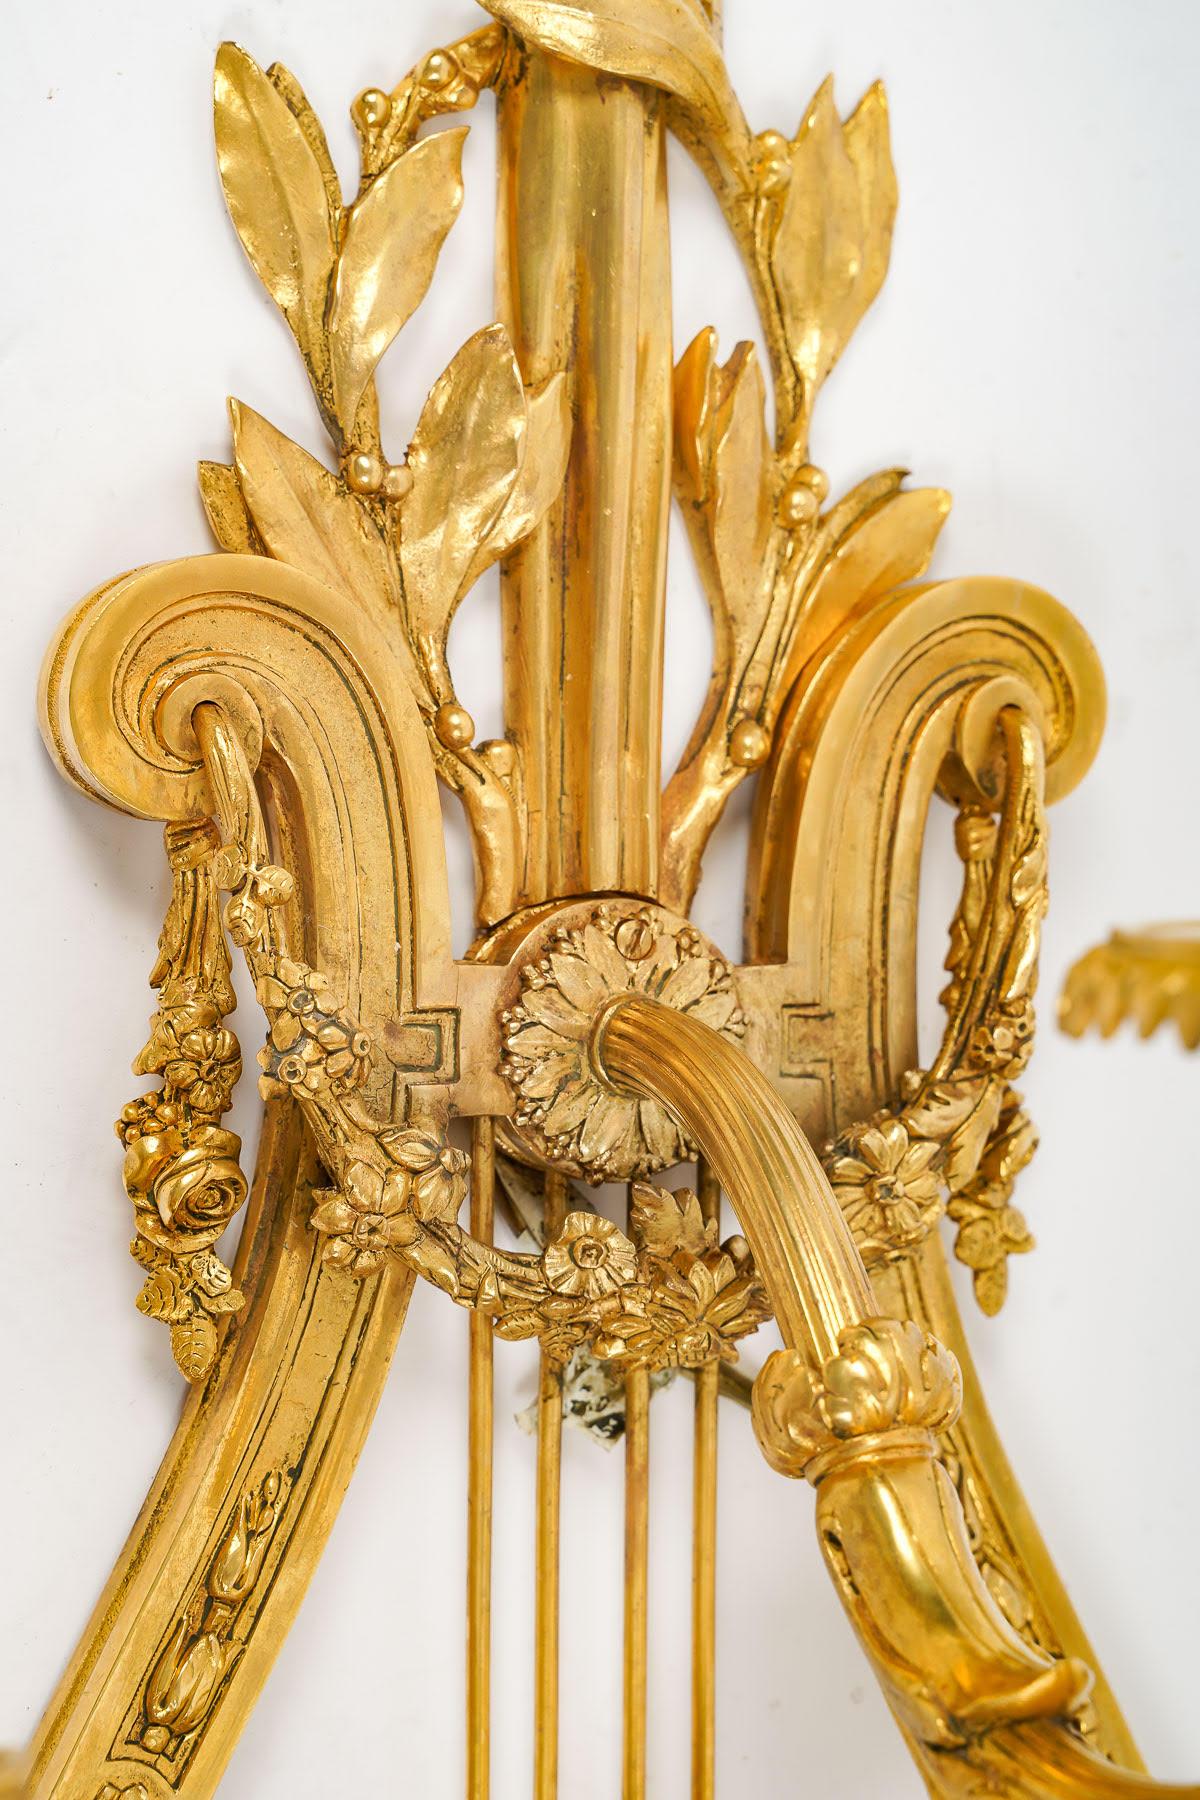 Large Pair of 19th Century Chased and Gilt Bronze Sconces.

Pair of 19th century gilt bronze and chased sconces, Napoleon III period.
h: 104cm, w: 39cm, d: 26cm